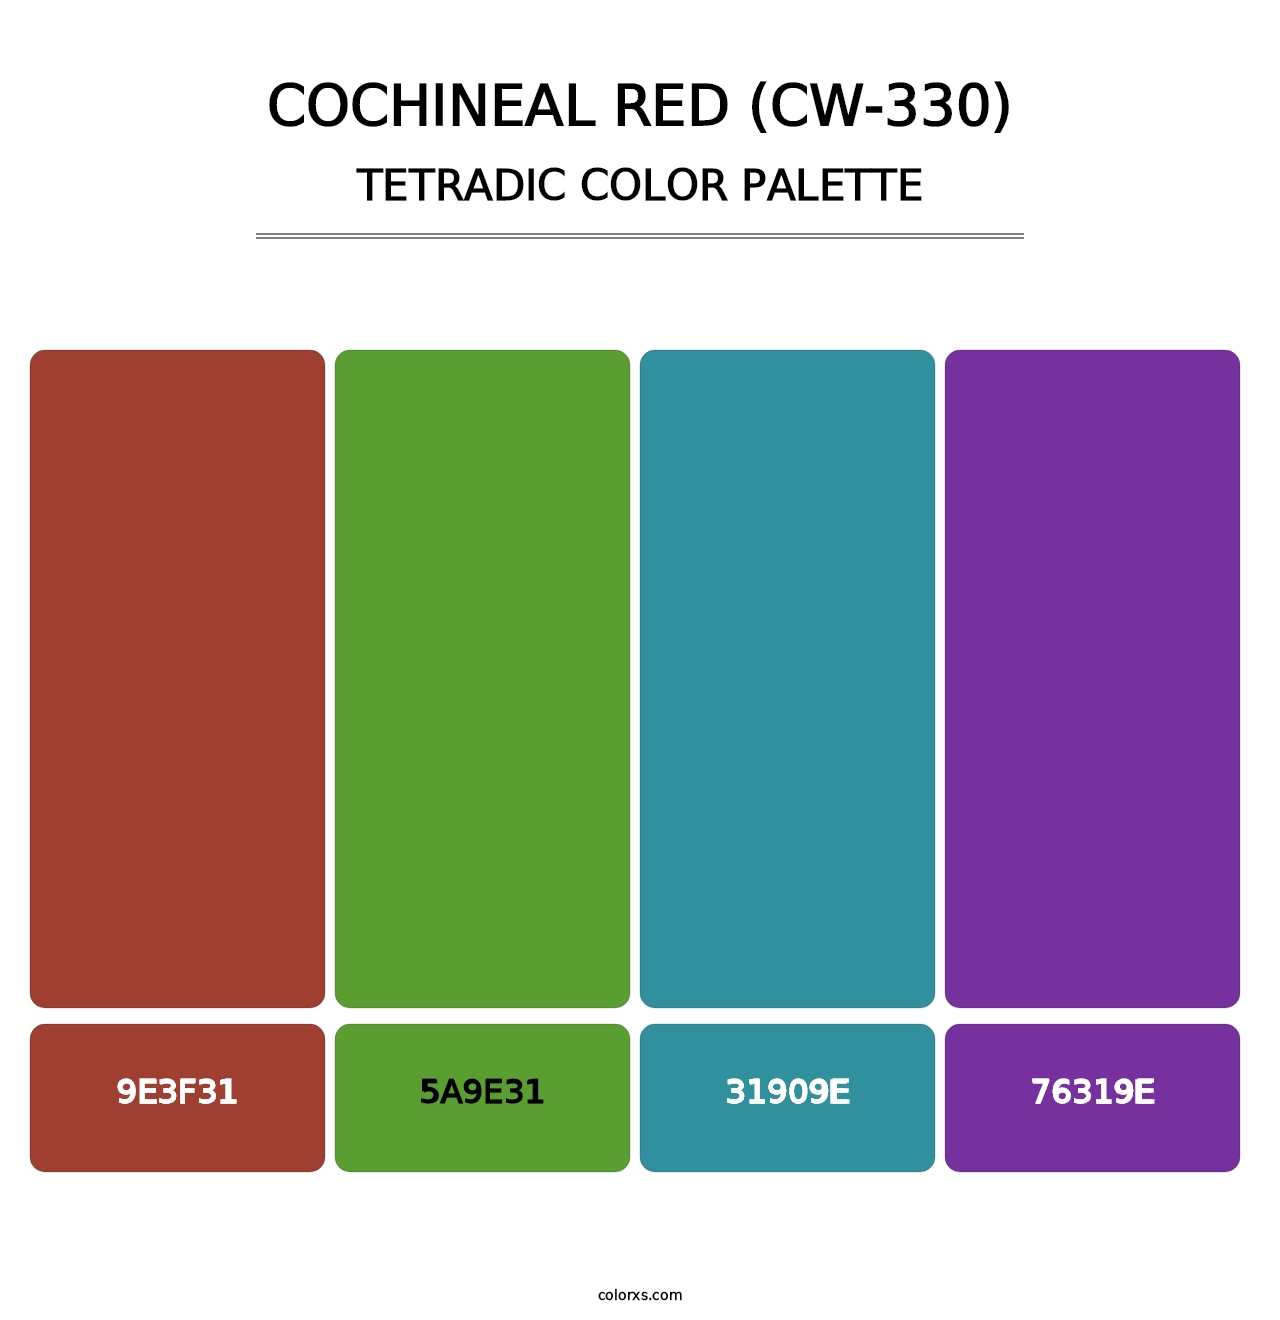 Cochineal Red (CW-330) - Tetradic Color Palette